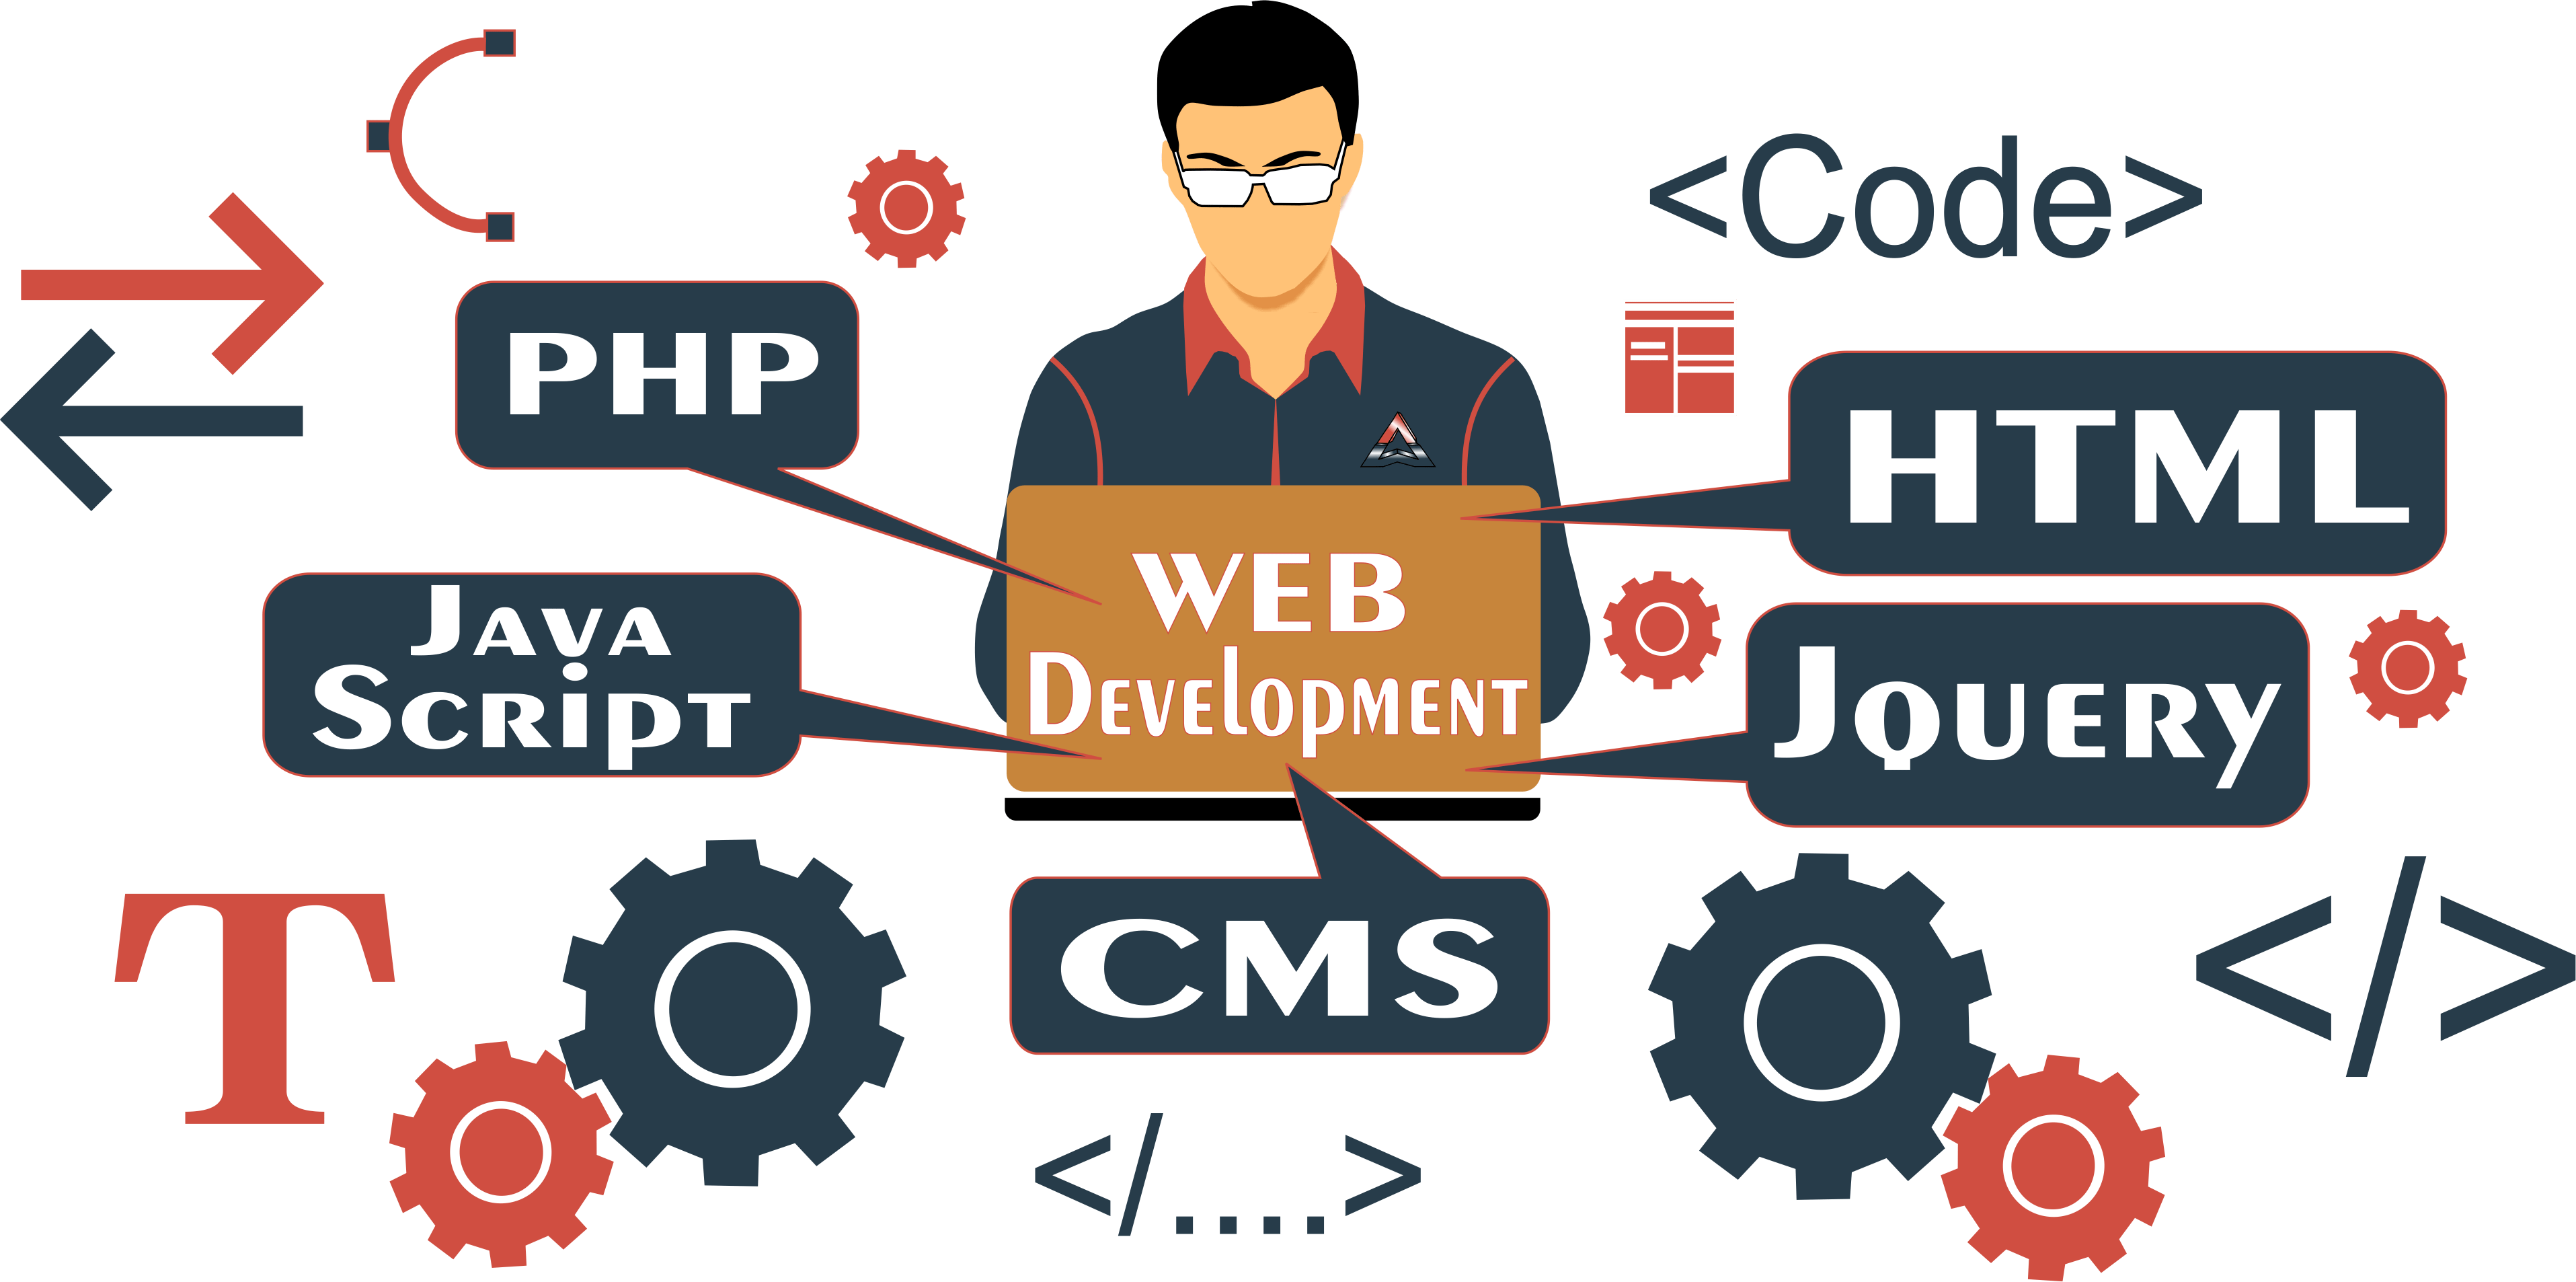 New Business must need support from Web Development Company!